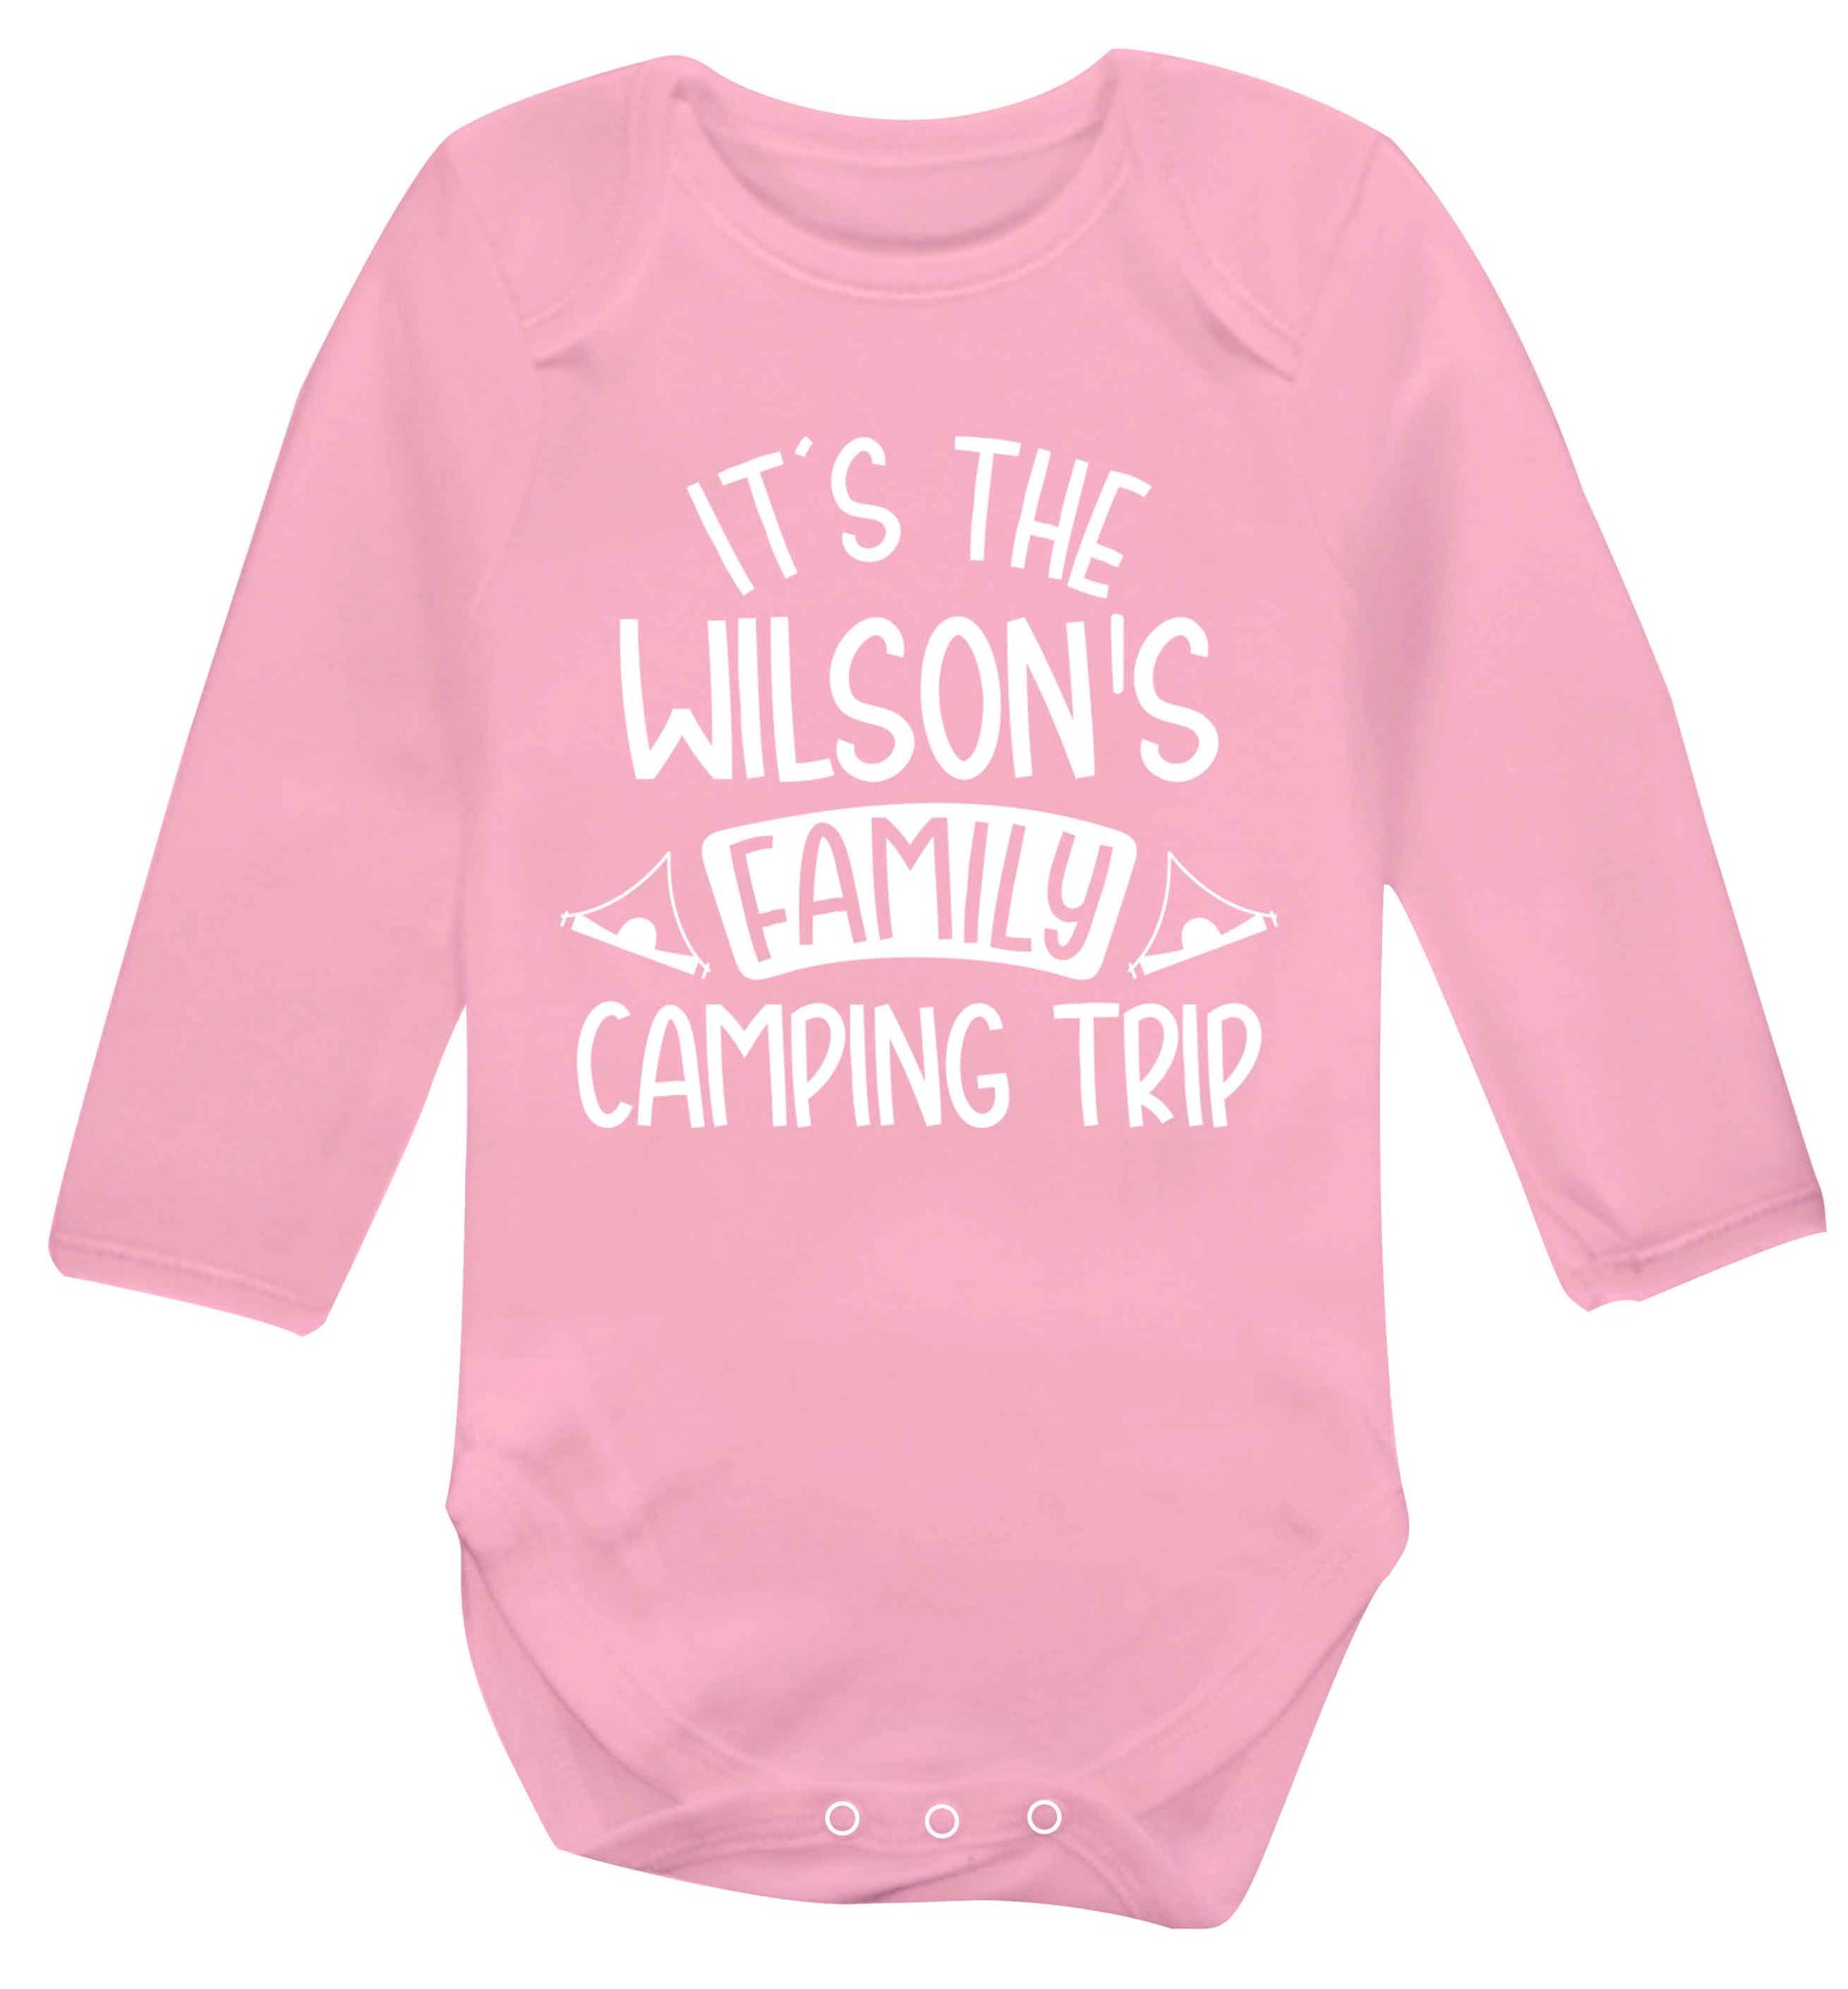 It's the Wilson's family camping trip personalised Baby Vest long sleeved pale pink 6-12 months